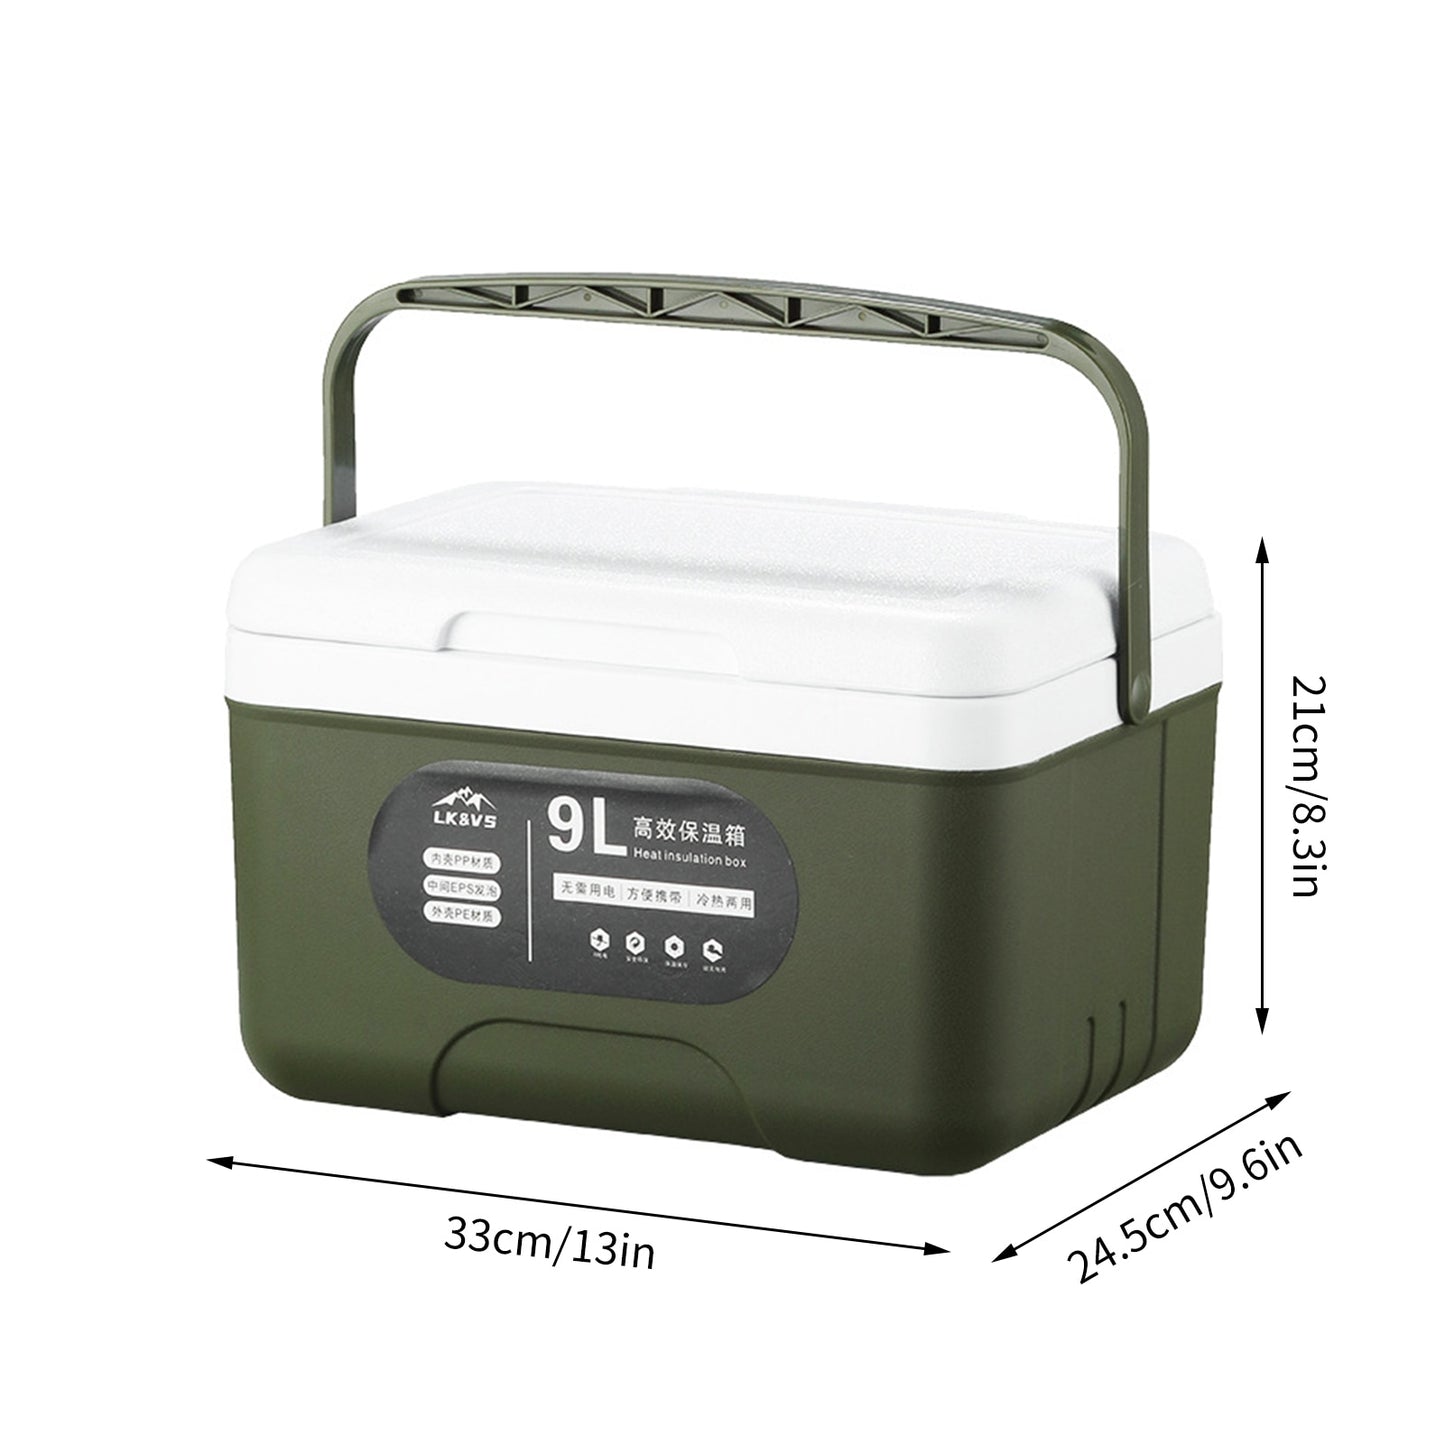 Heavy Duty Ice Box 8.1 QT Personal Ice Chest High-Performance Eco-friendly Heavy Duty Ice Box For Travel Beach Party Work